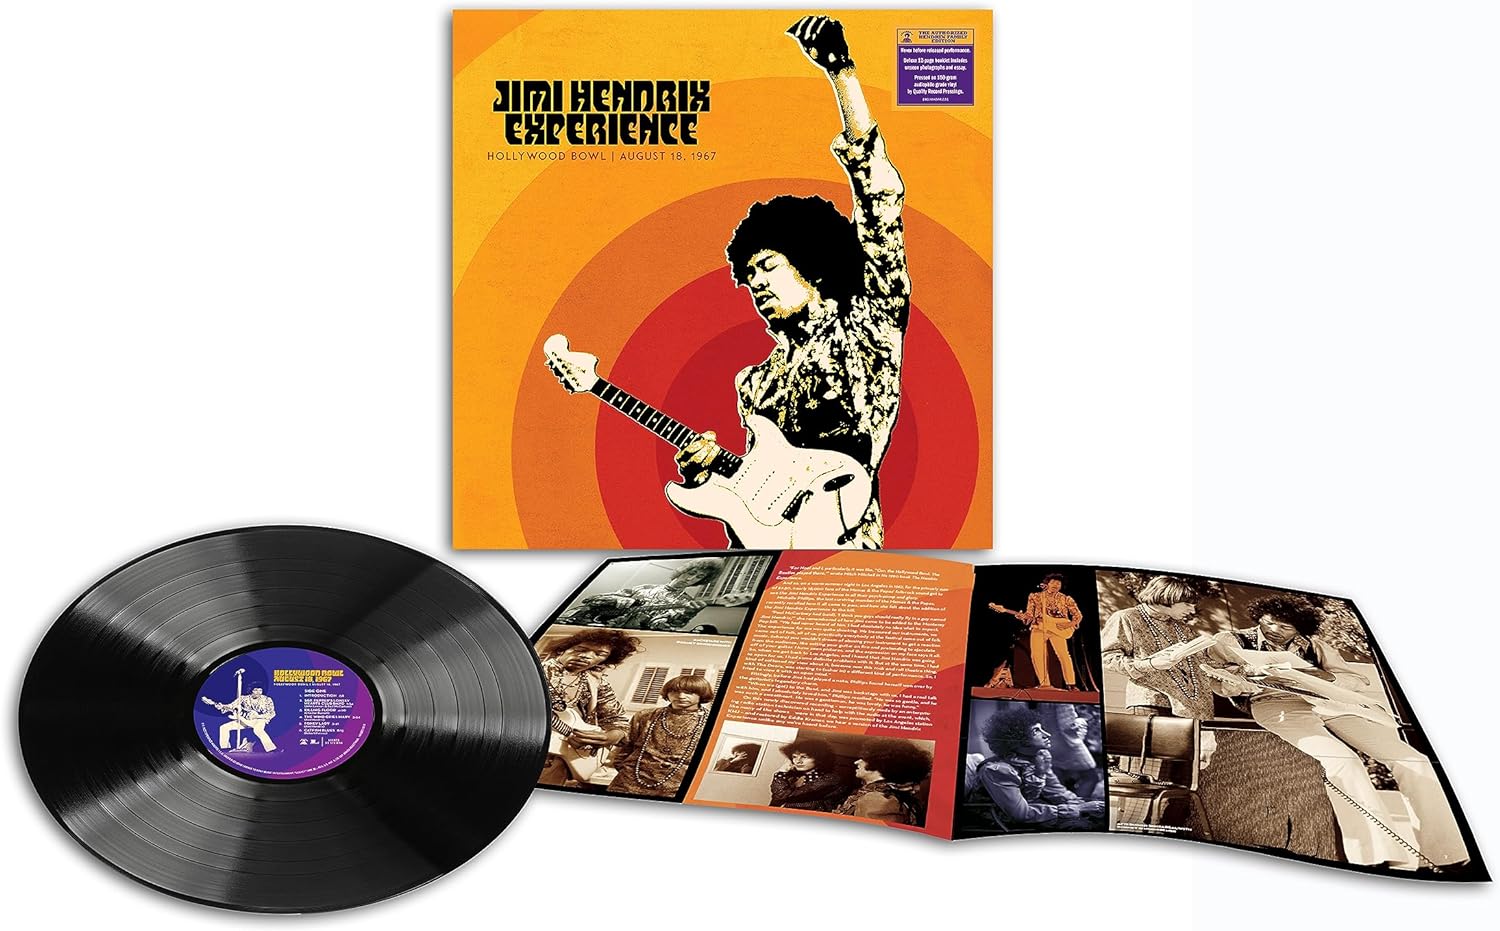 HENDRIX JIMI - EXPERIENCE - Live At The Hollywood Bowl: August 18, 1967